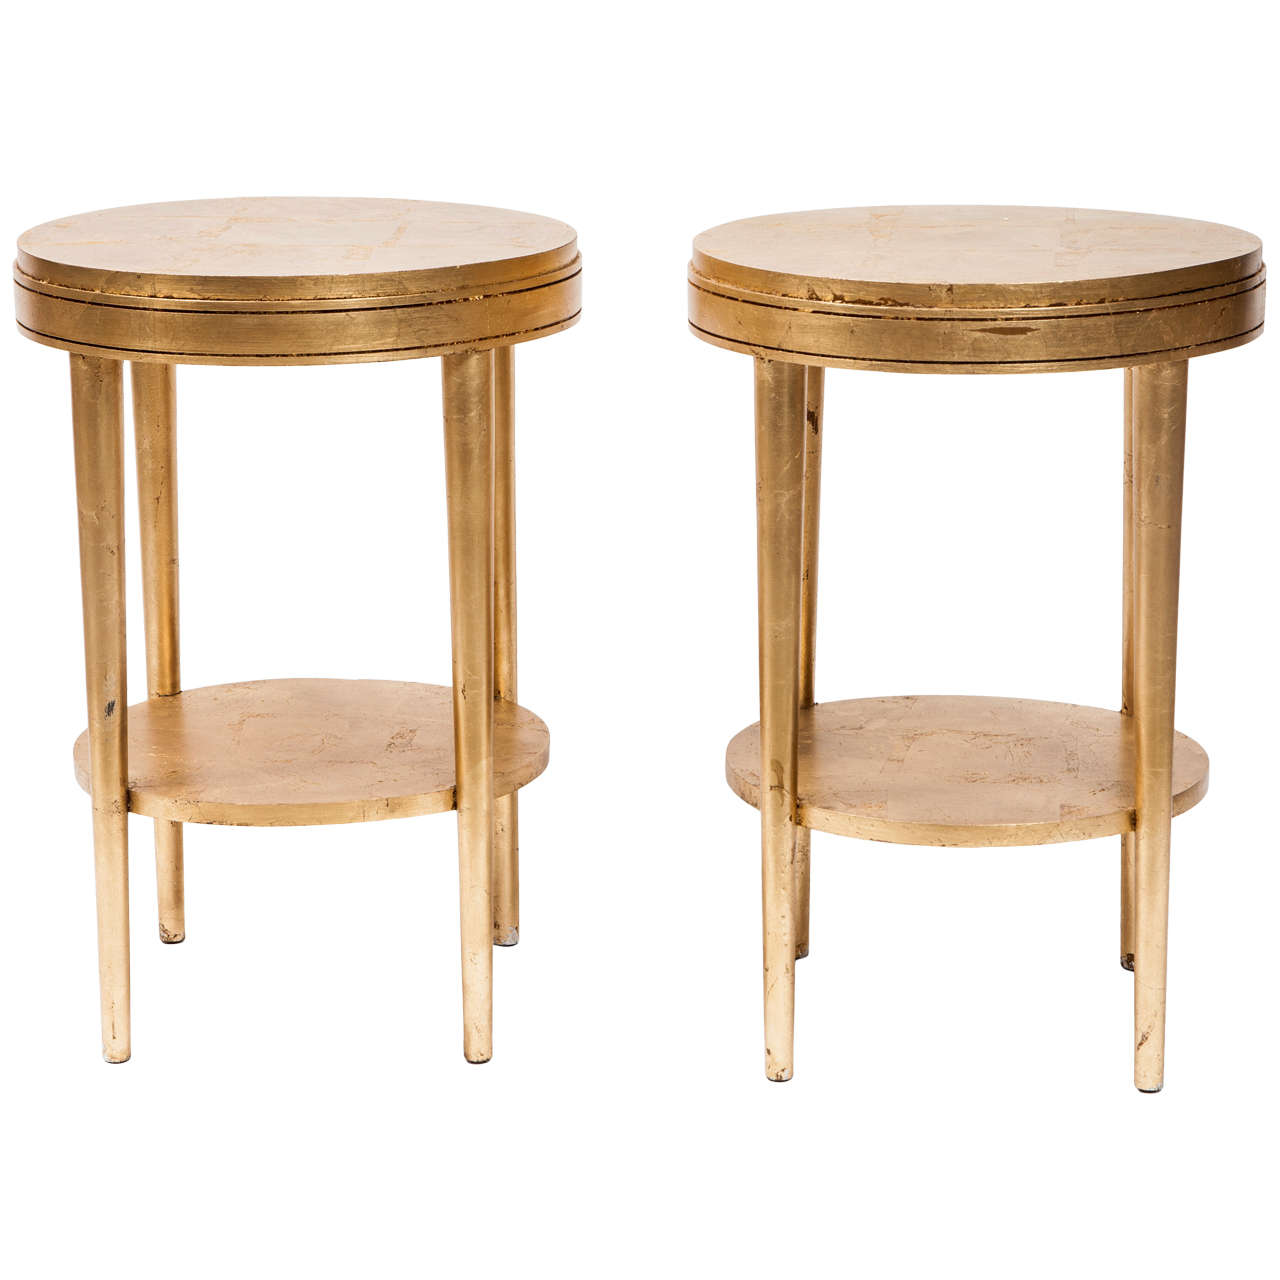 Pair of Giltwood Side Tables